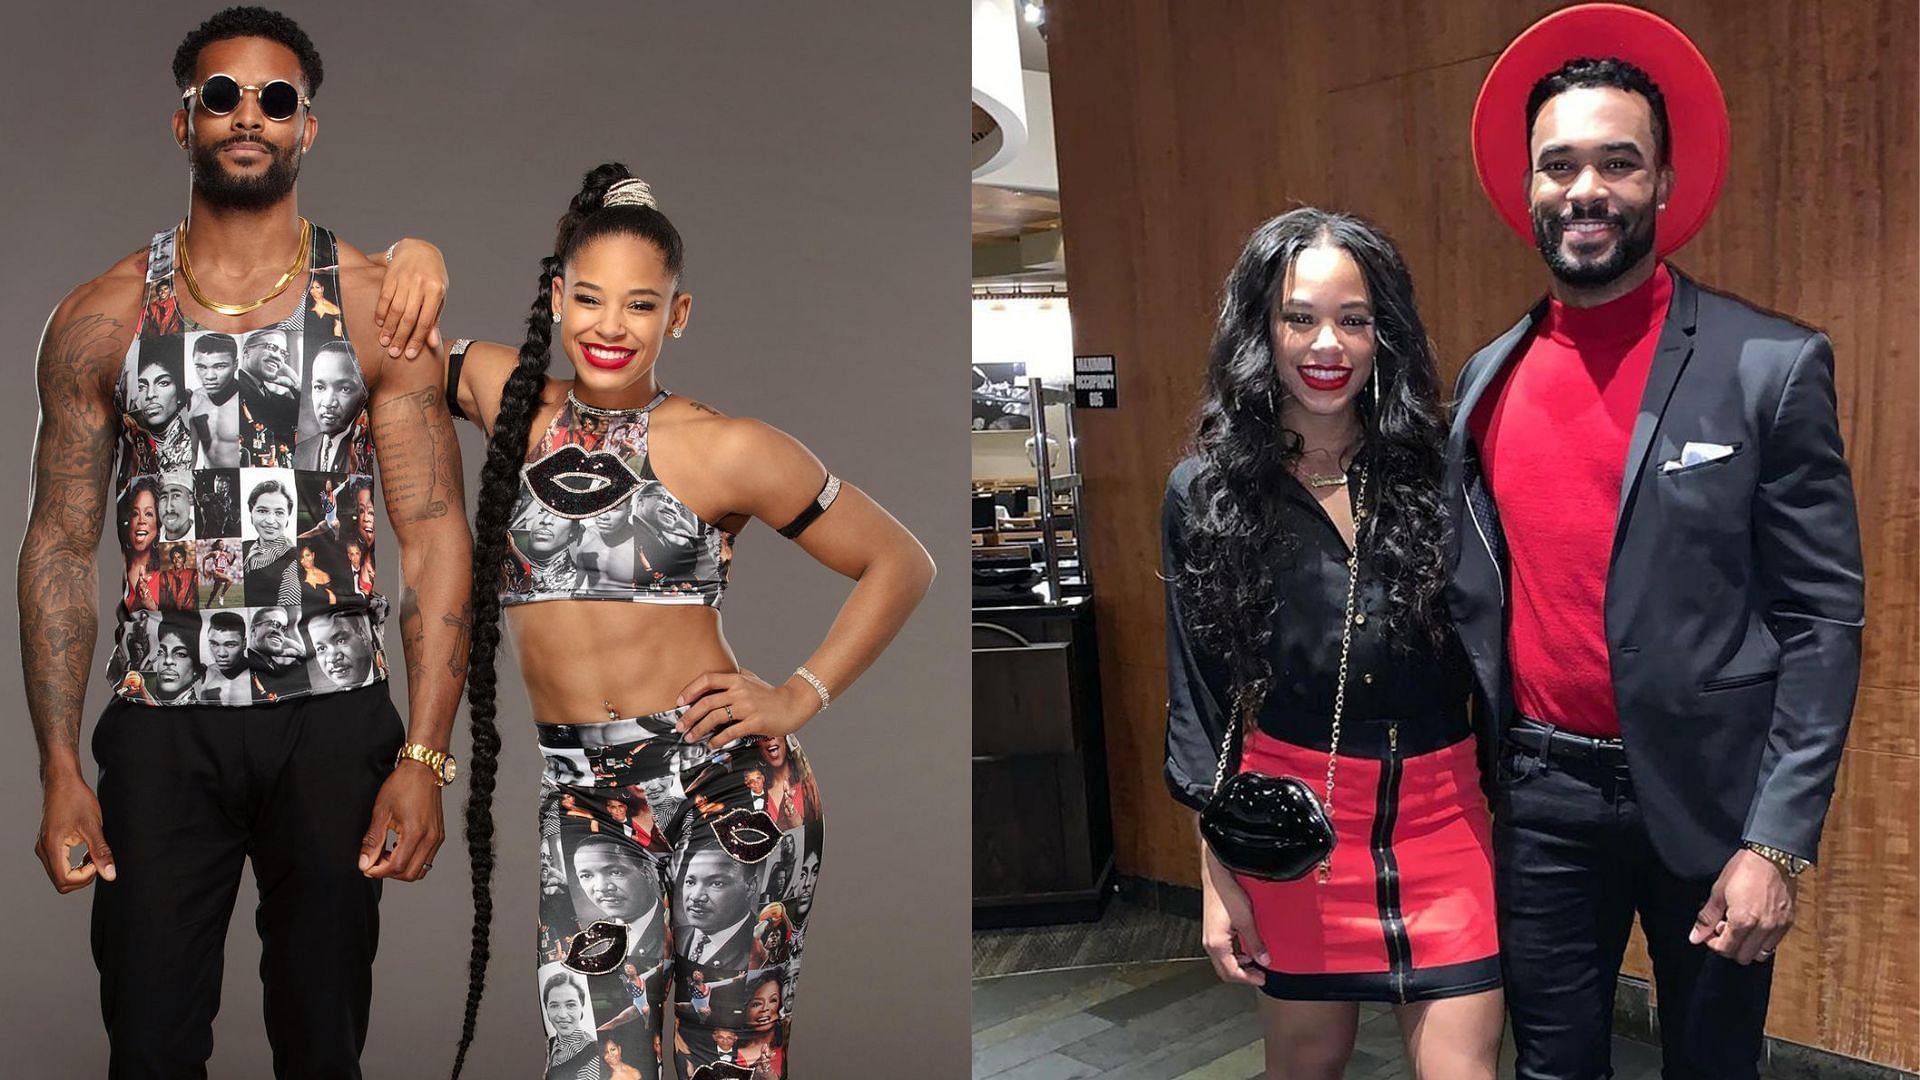 Bianca Belair and Montez Ford in picture